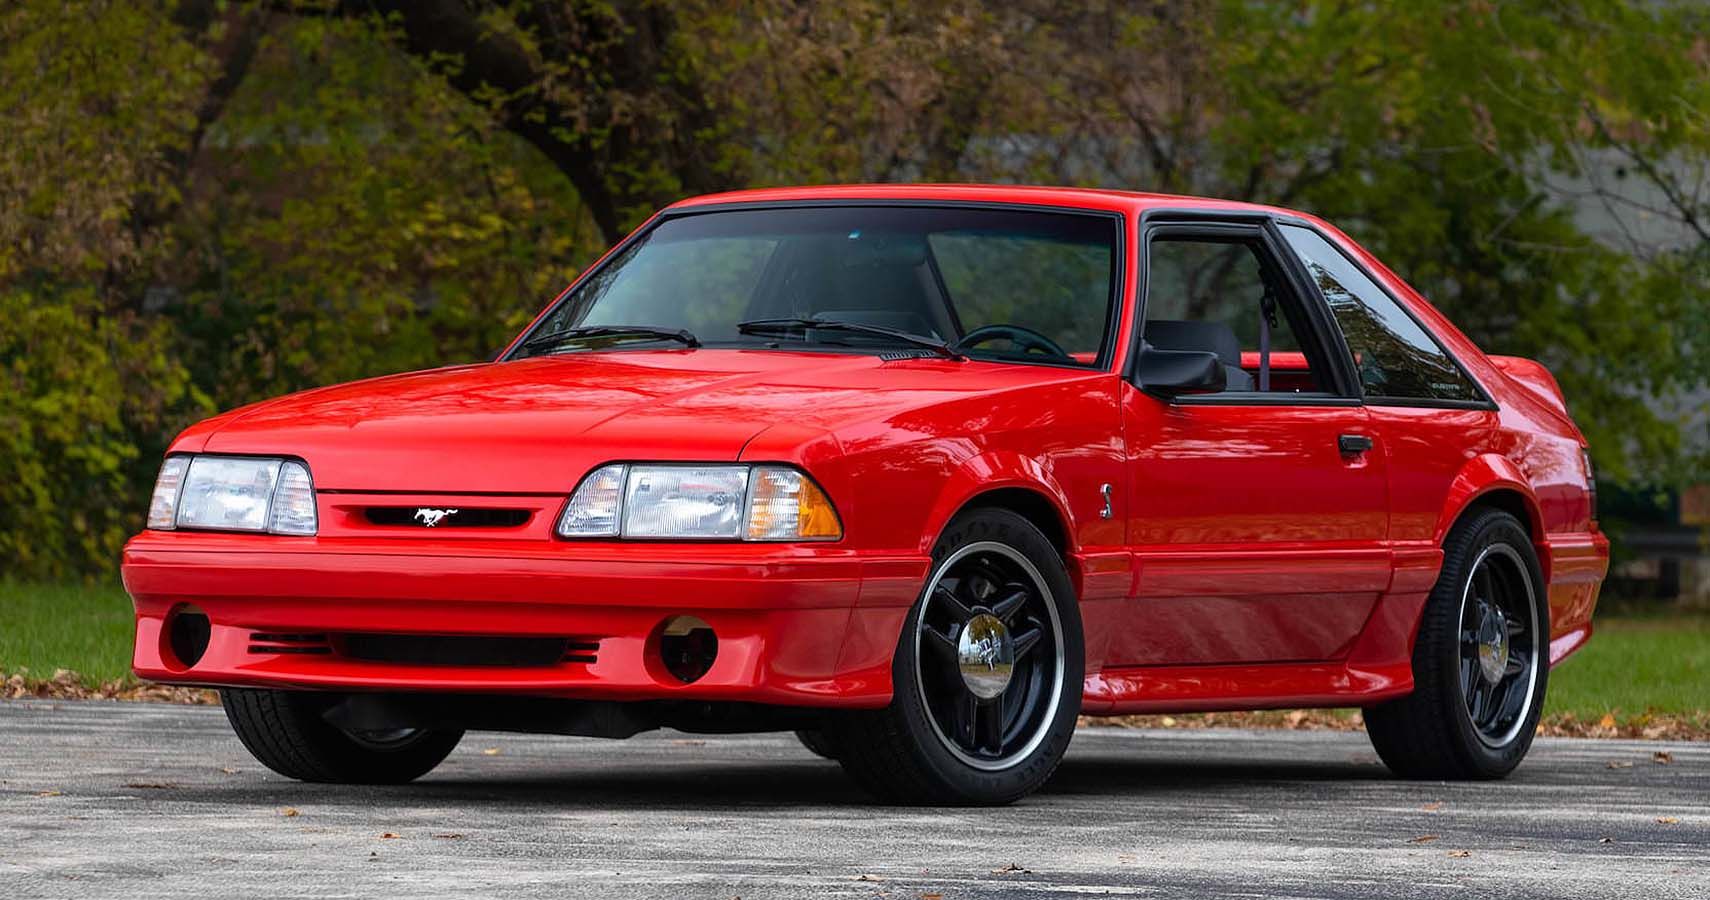 Things Only Real Muscle Car Fans Know About The Fox Body Mustang